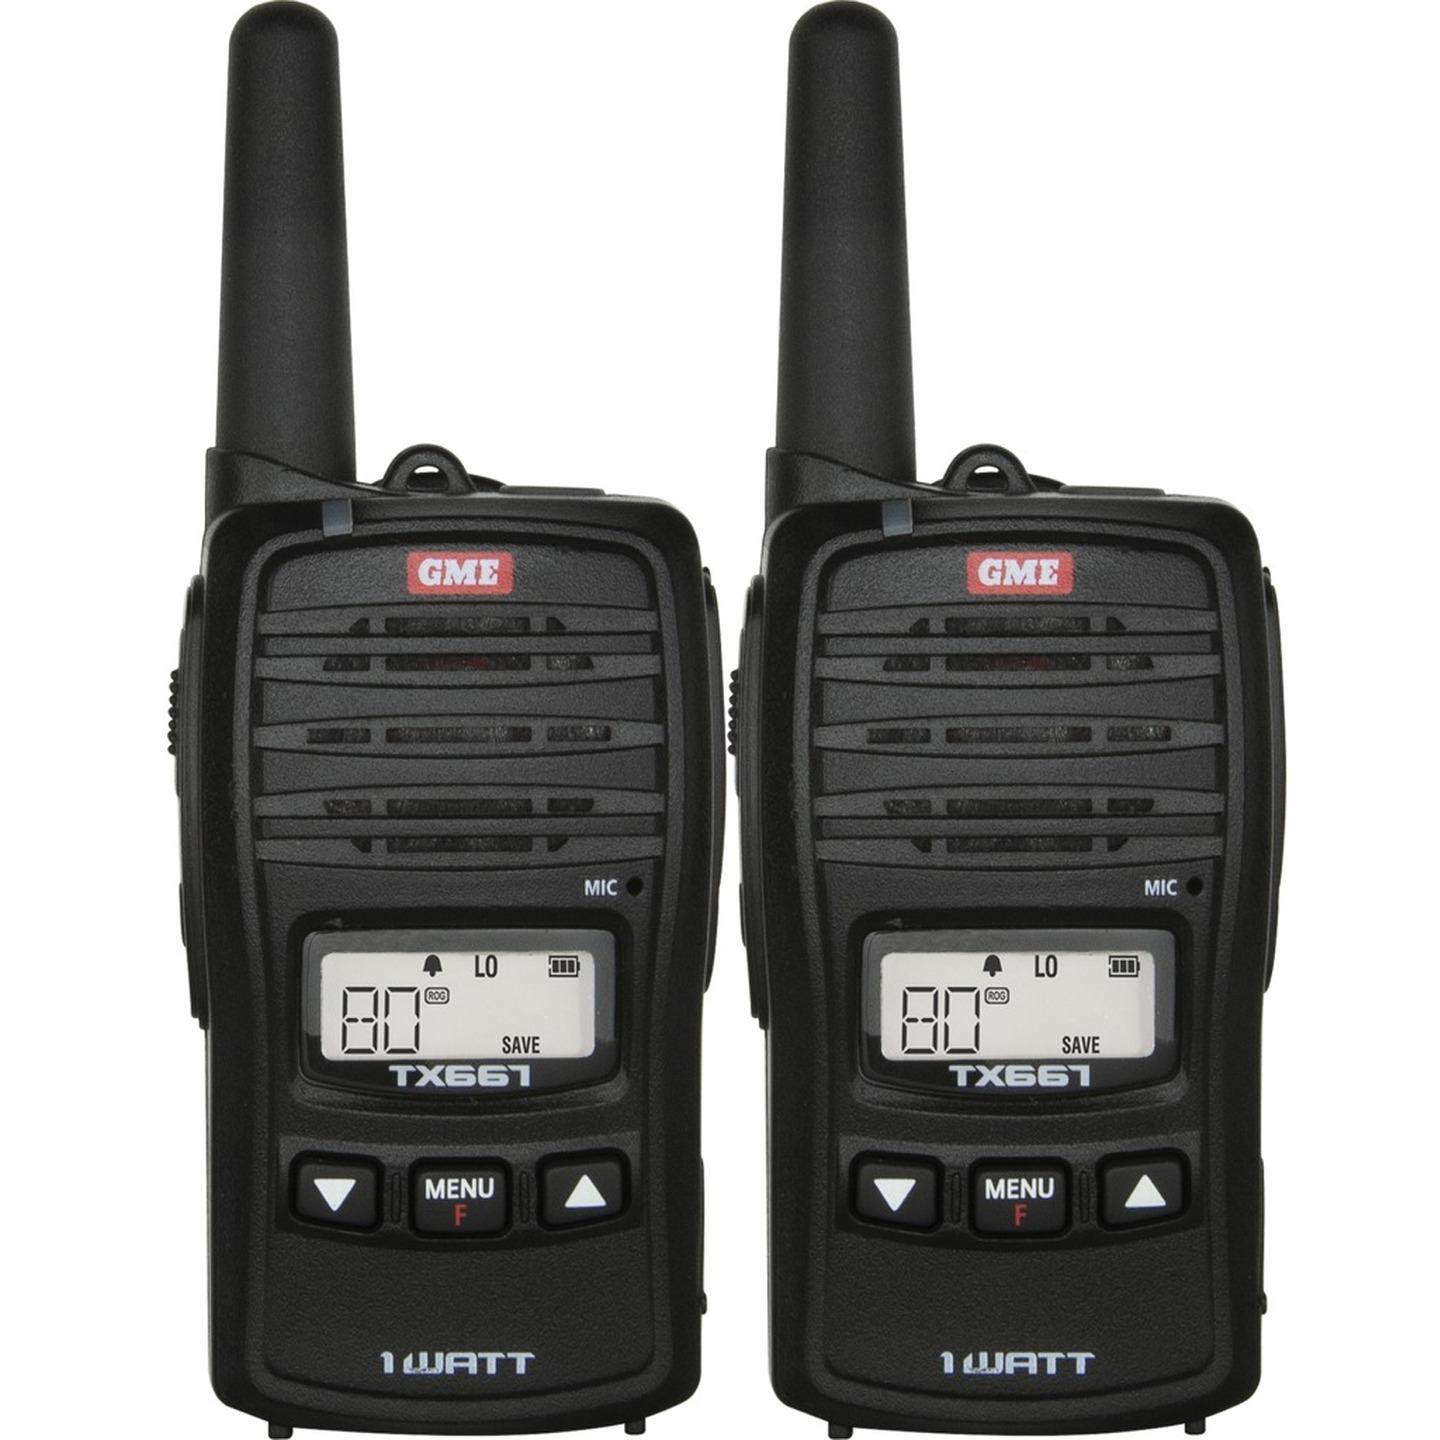 GME 1W UHF Transceiver TX667TP Twin Pack